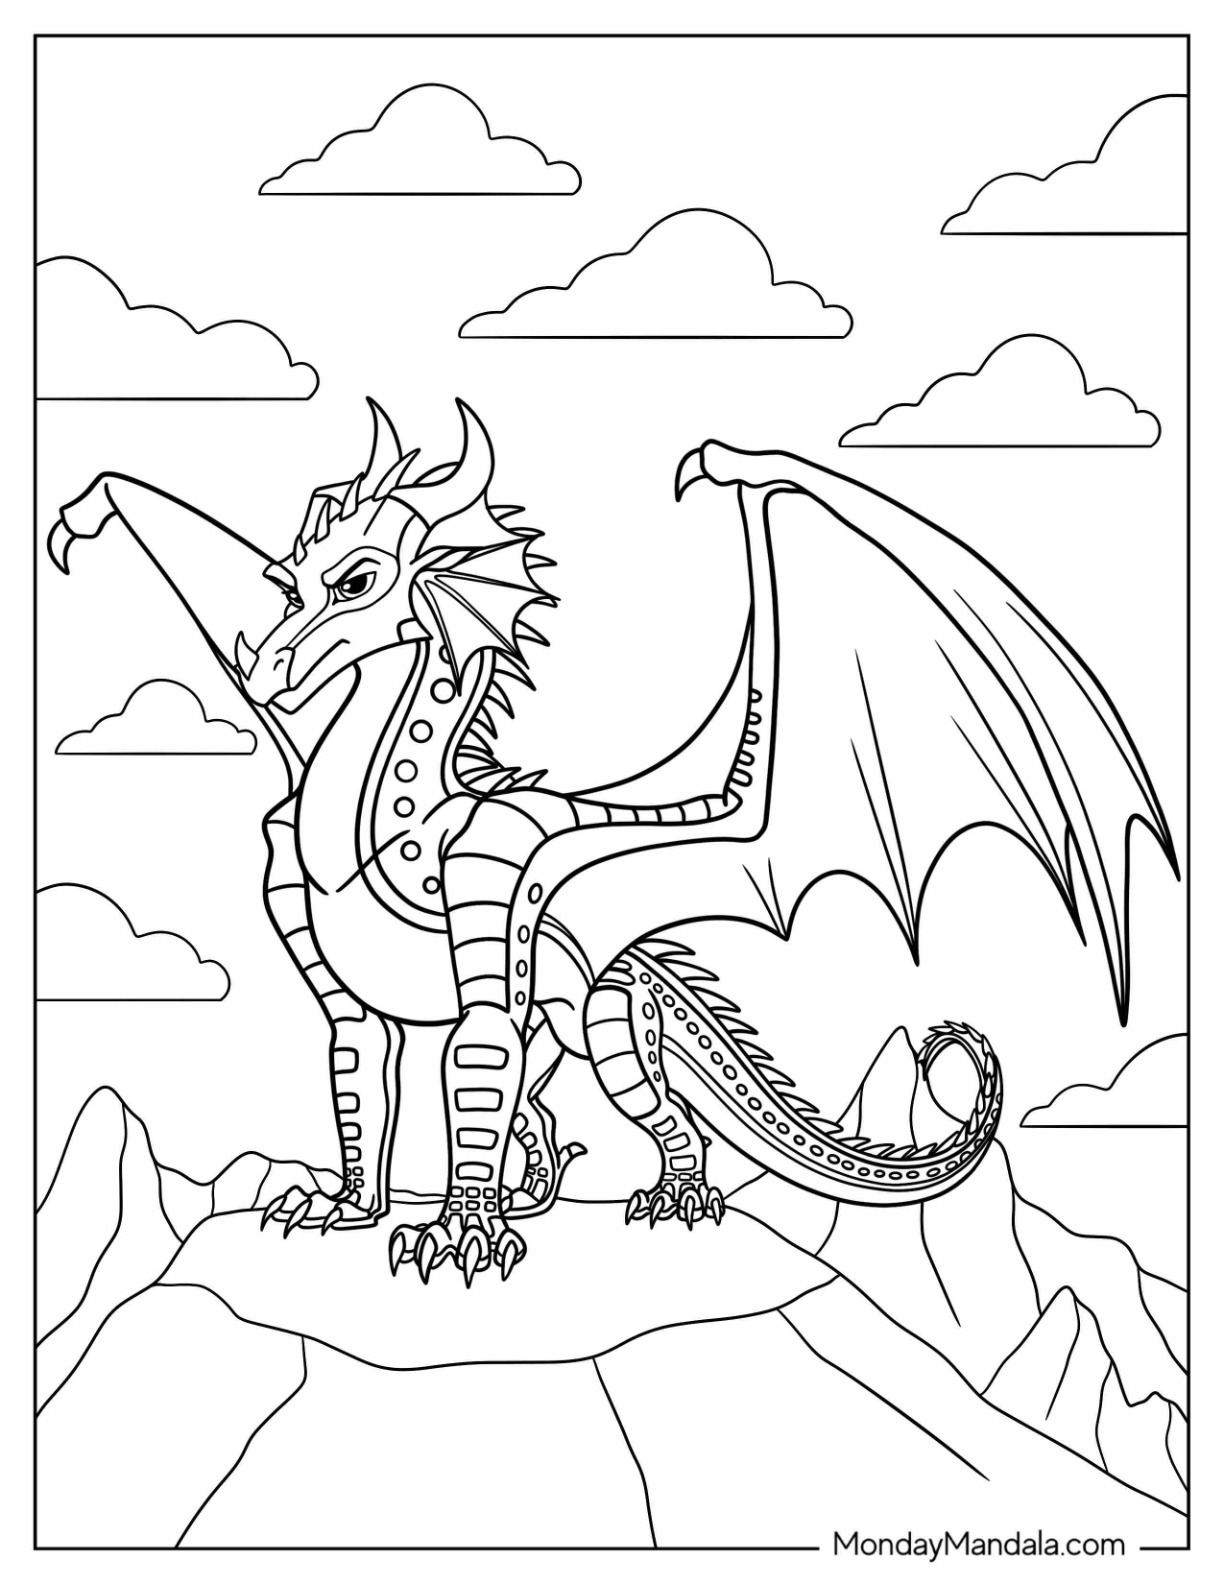 Wings of fire coloring pages free pdf printables